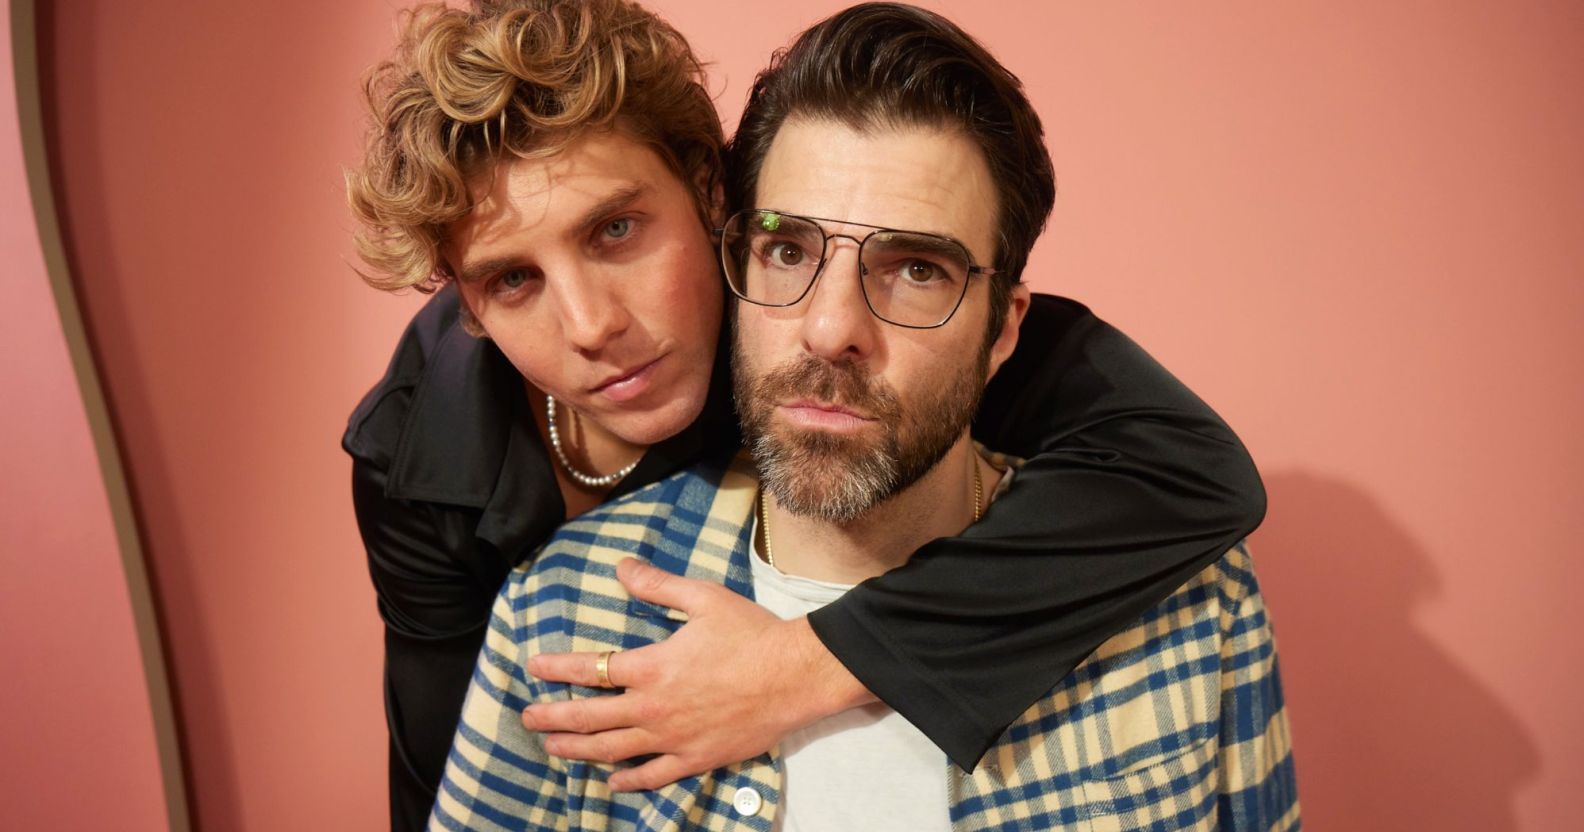 Lukas Gage and Zachary Quinto star in horny comedy Down Low